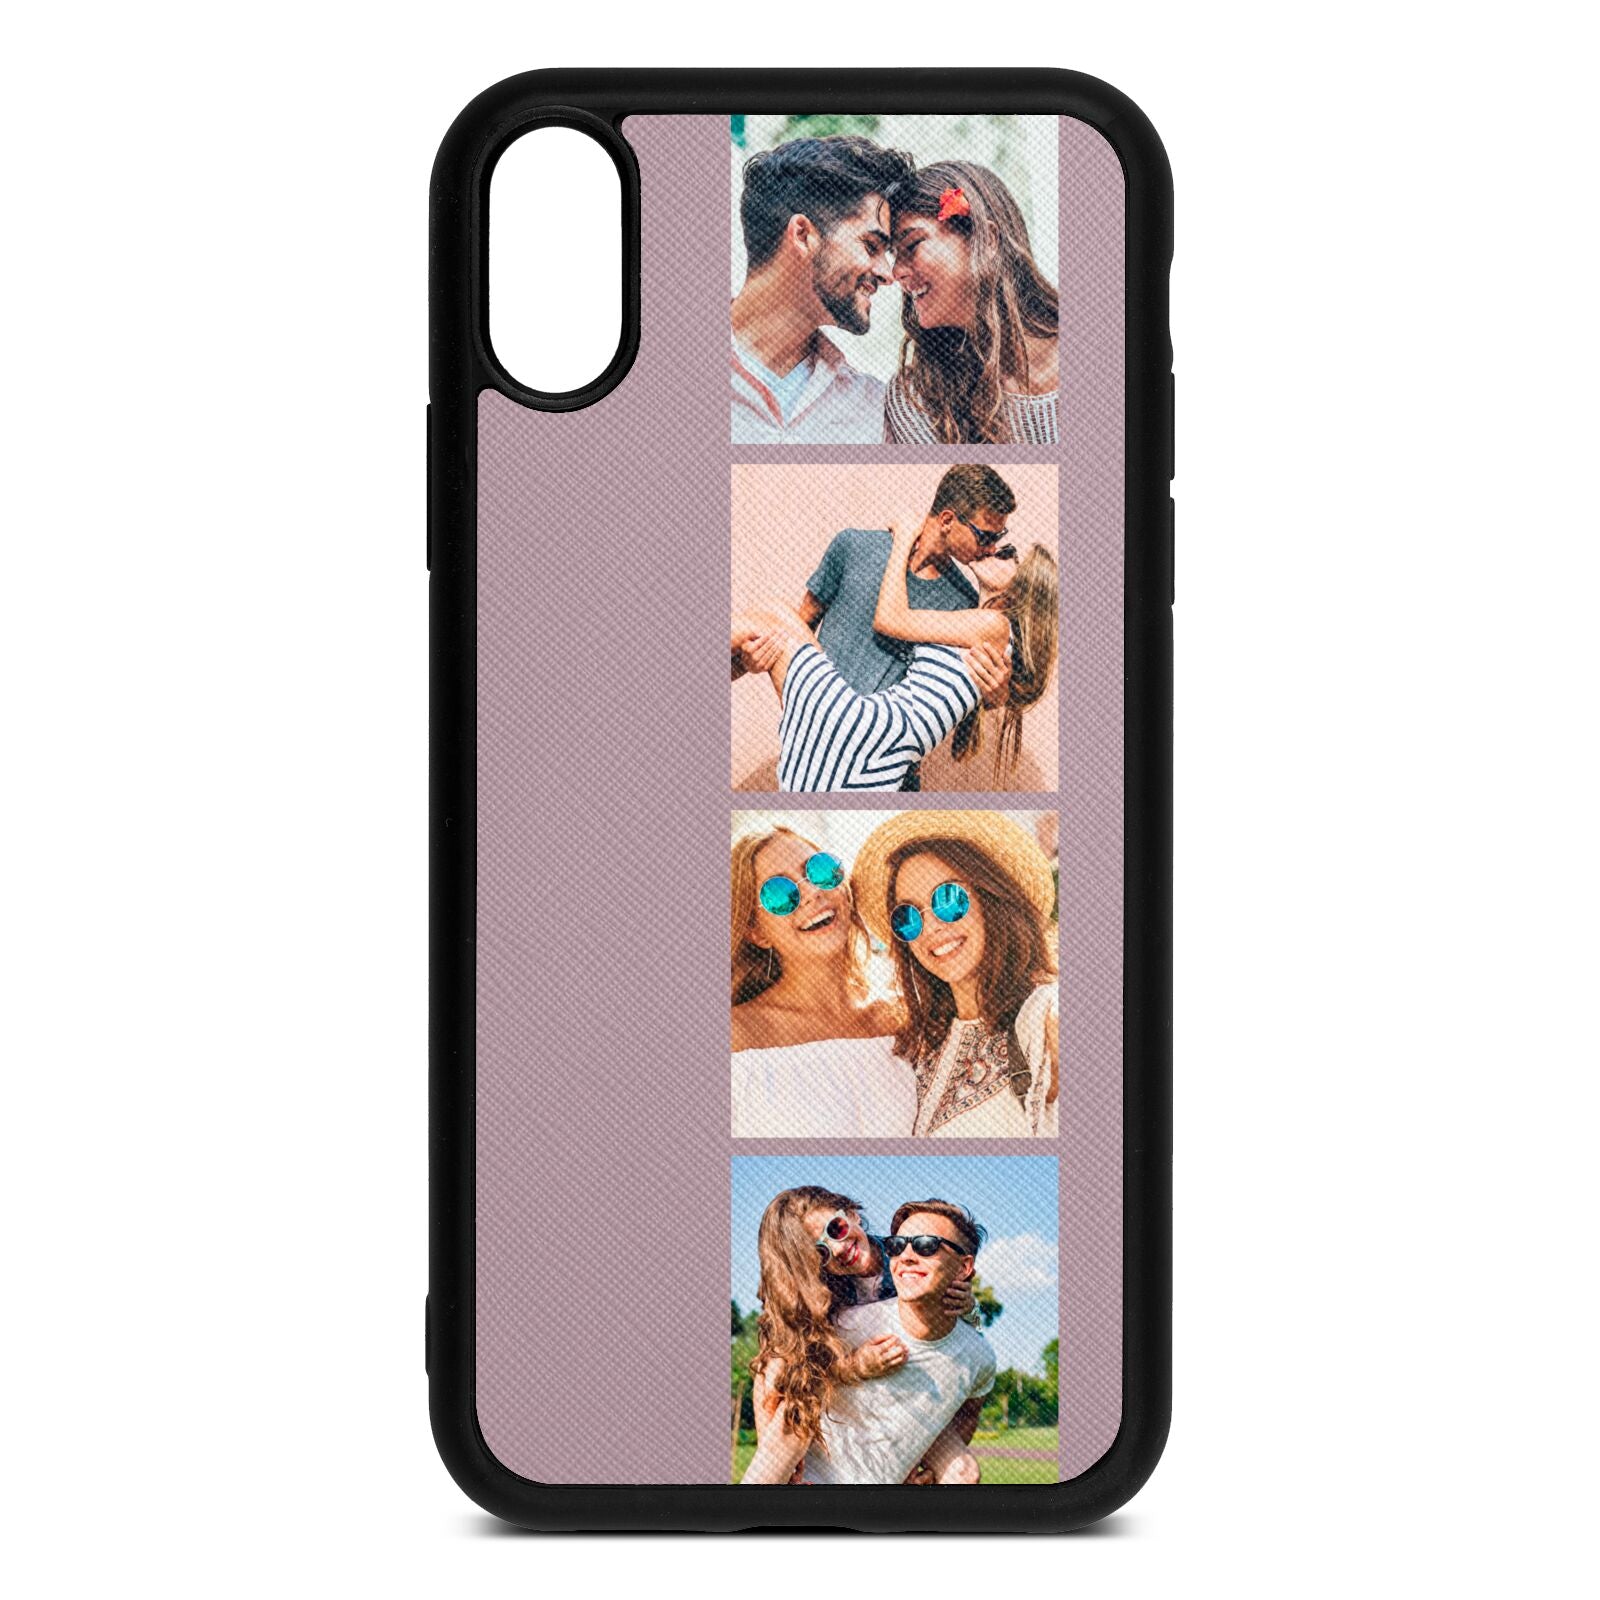 Photo Strip Montage Upload Lotus Saffiano Leather iPhone Xr Case